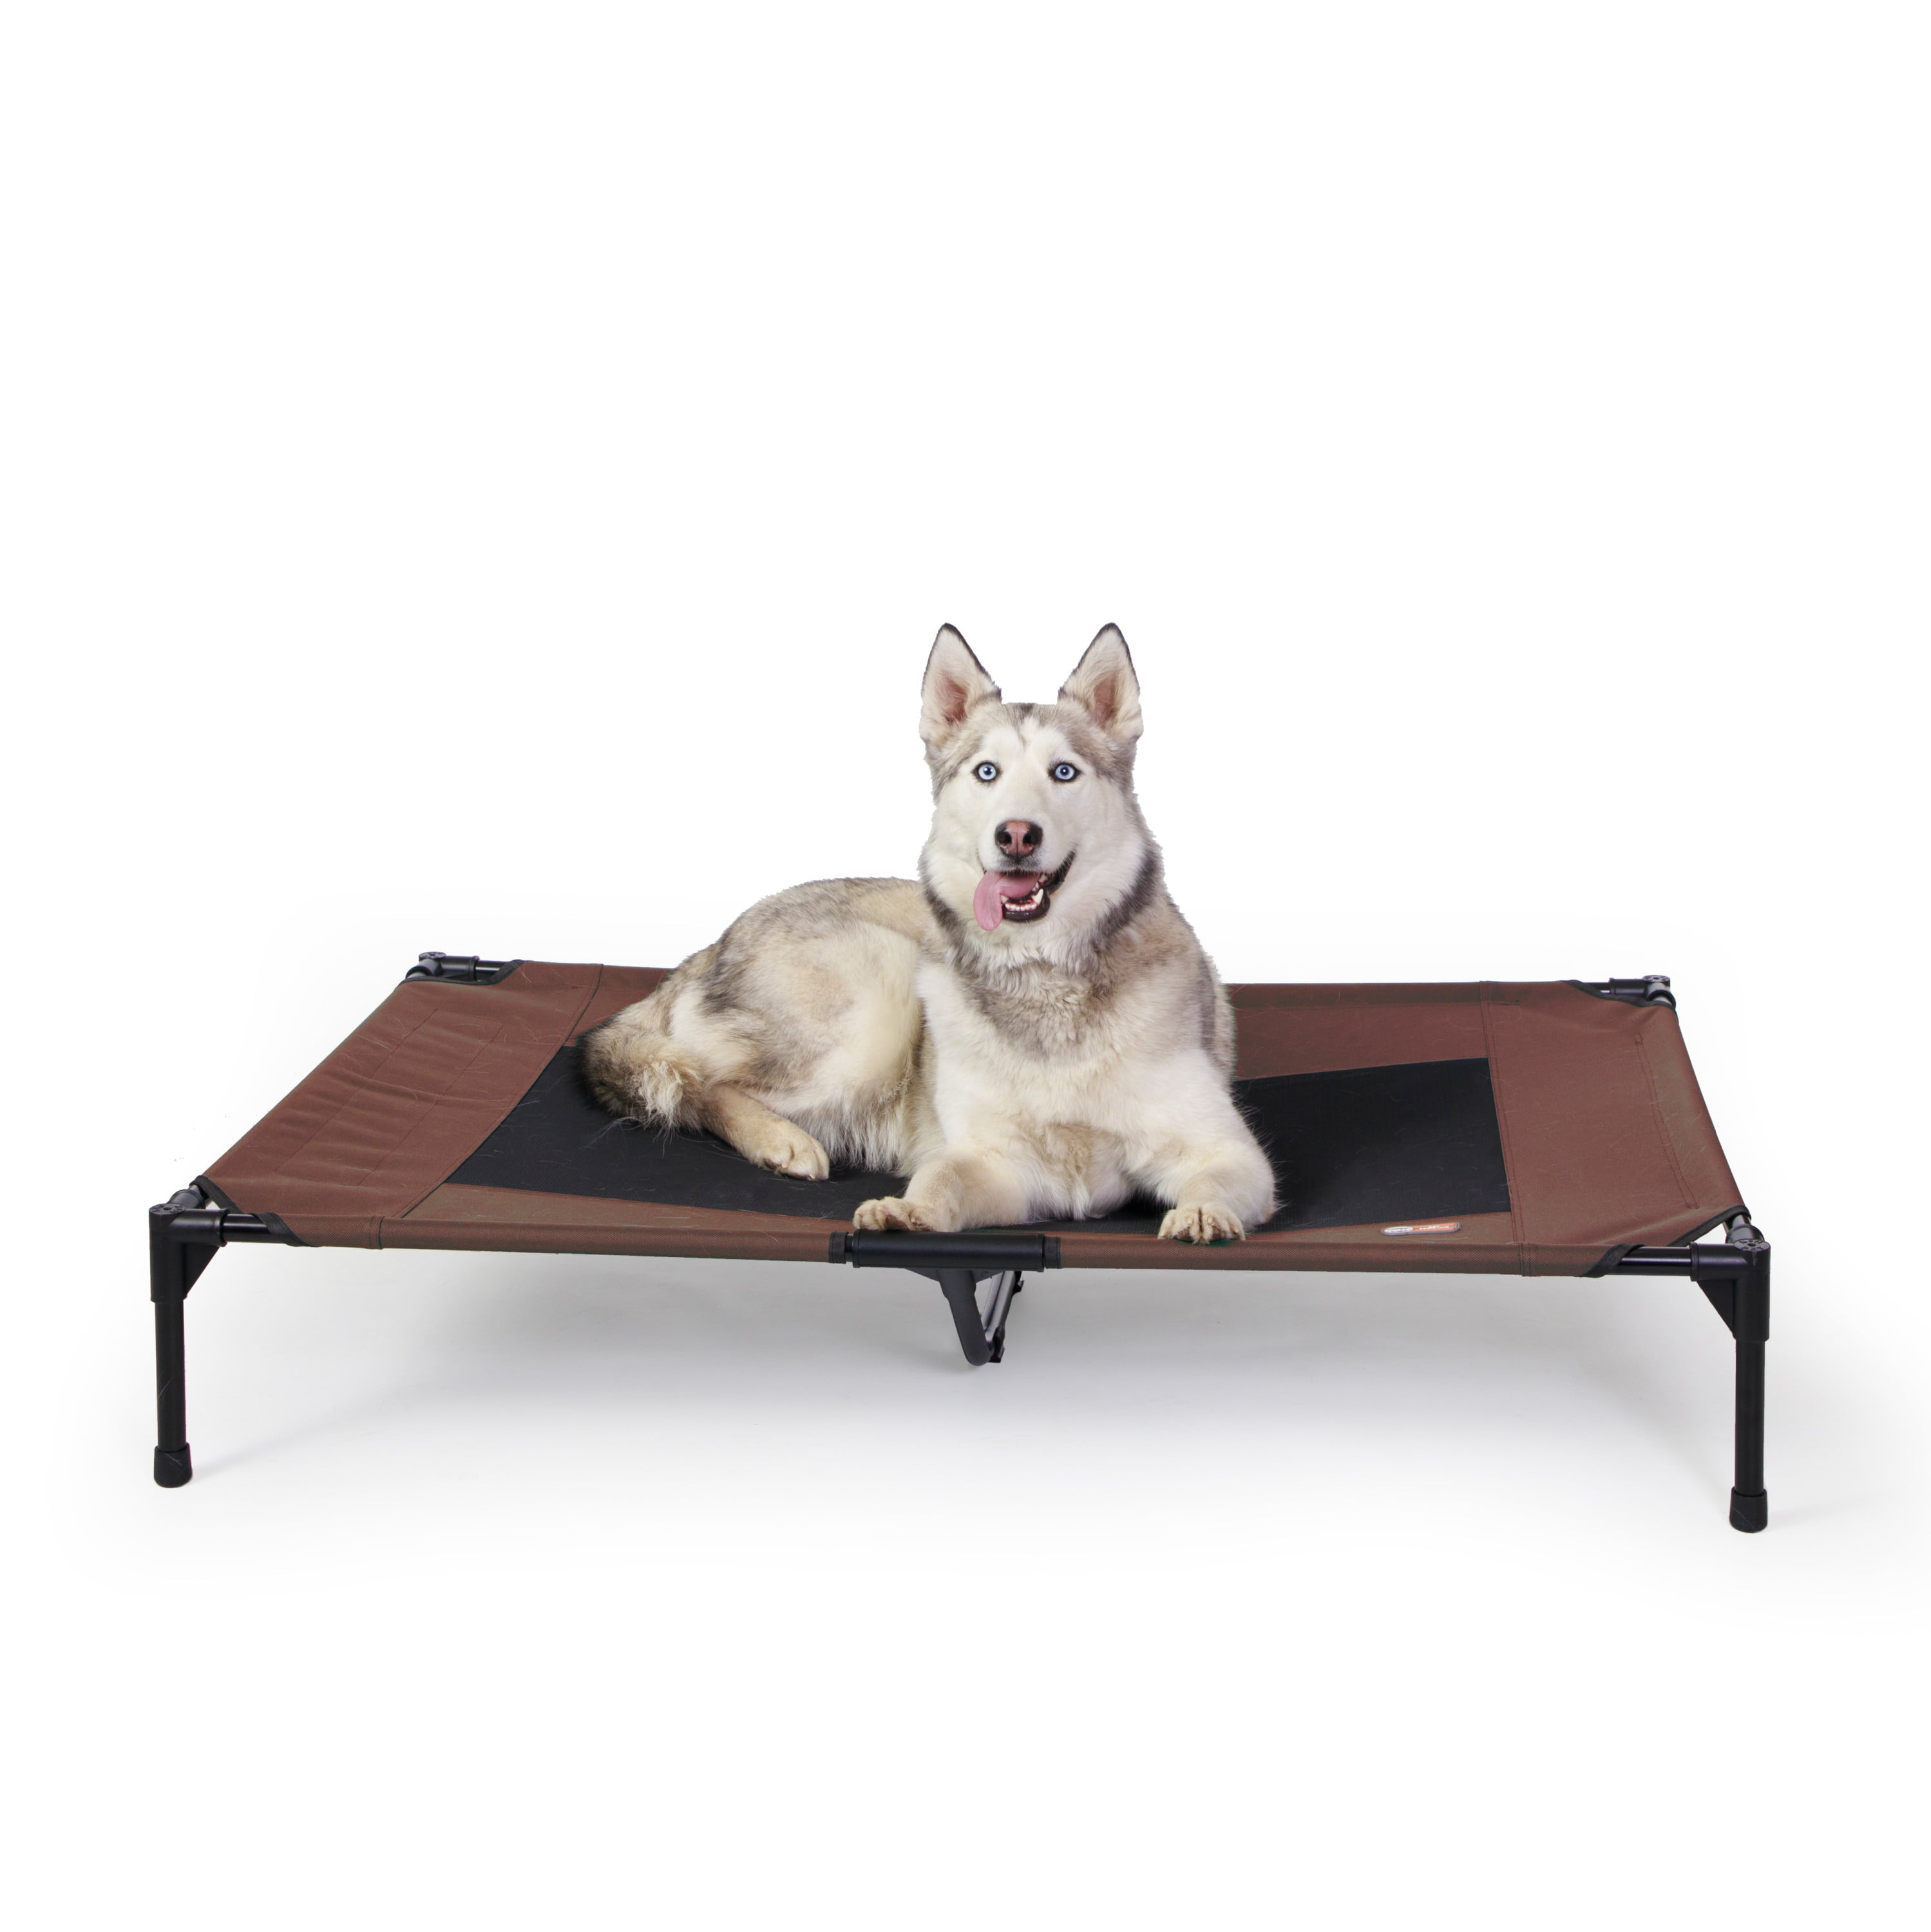 KandH Original Pet Cot Elevated Dog Bed Chocolate/Black Mesh X-Large 32 X 50 X 9 Inches